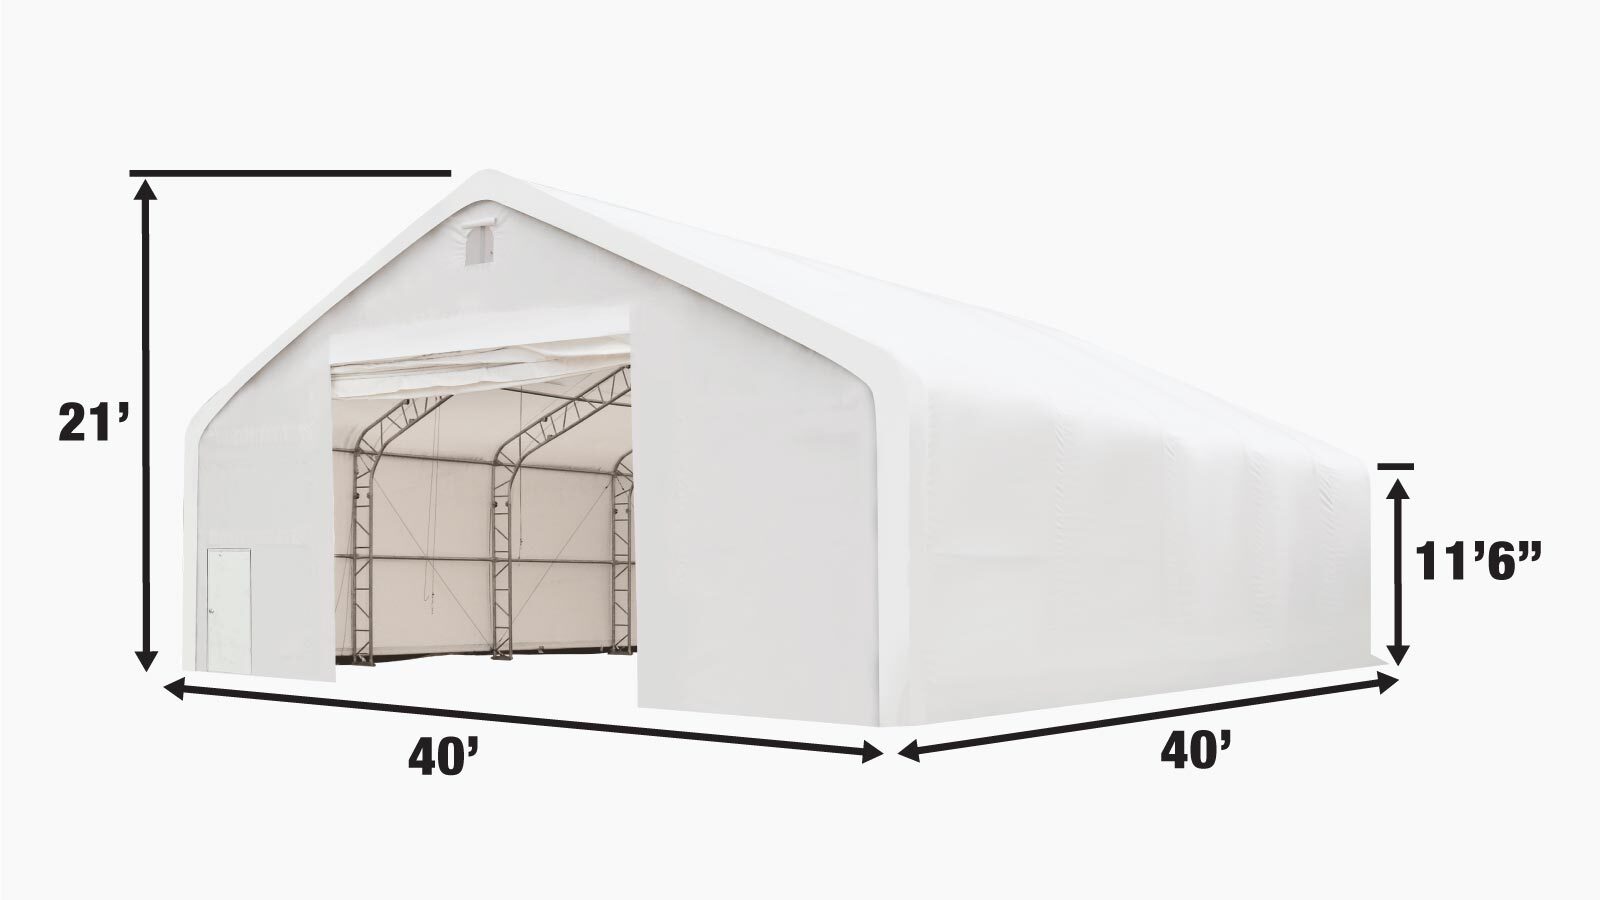 TMG Industrial Pro Series 40' x 40' Dual Truss Storage Shelter with Heavy Duty 21 oz PVC Cover & Drive Through Doors, TMG-DT4041-PRO (anciennement TMG-DT4040-PRO)-specifications-image